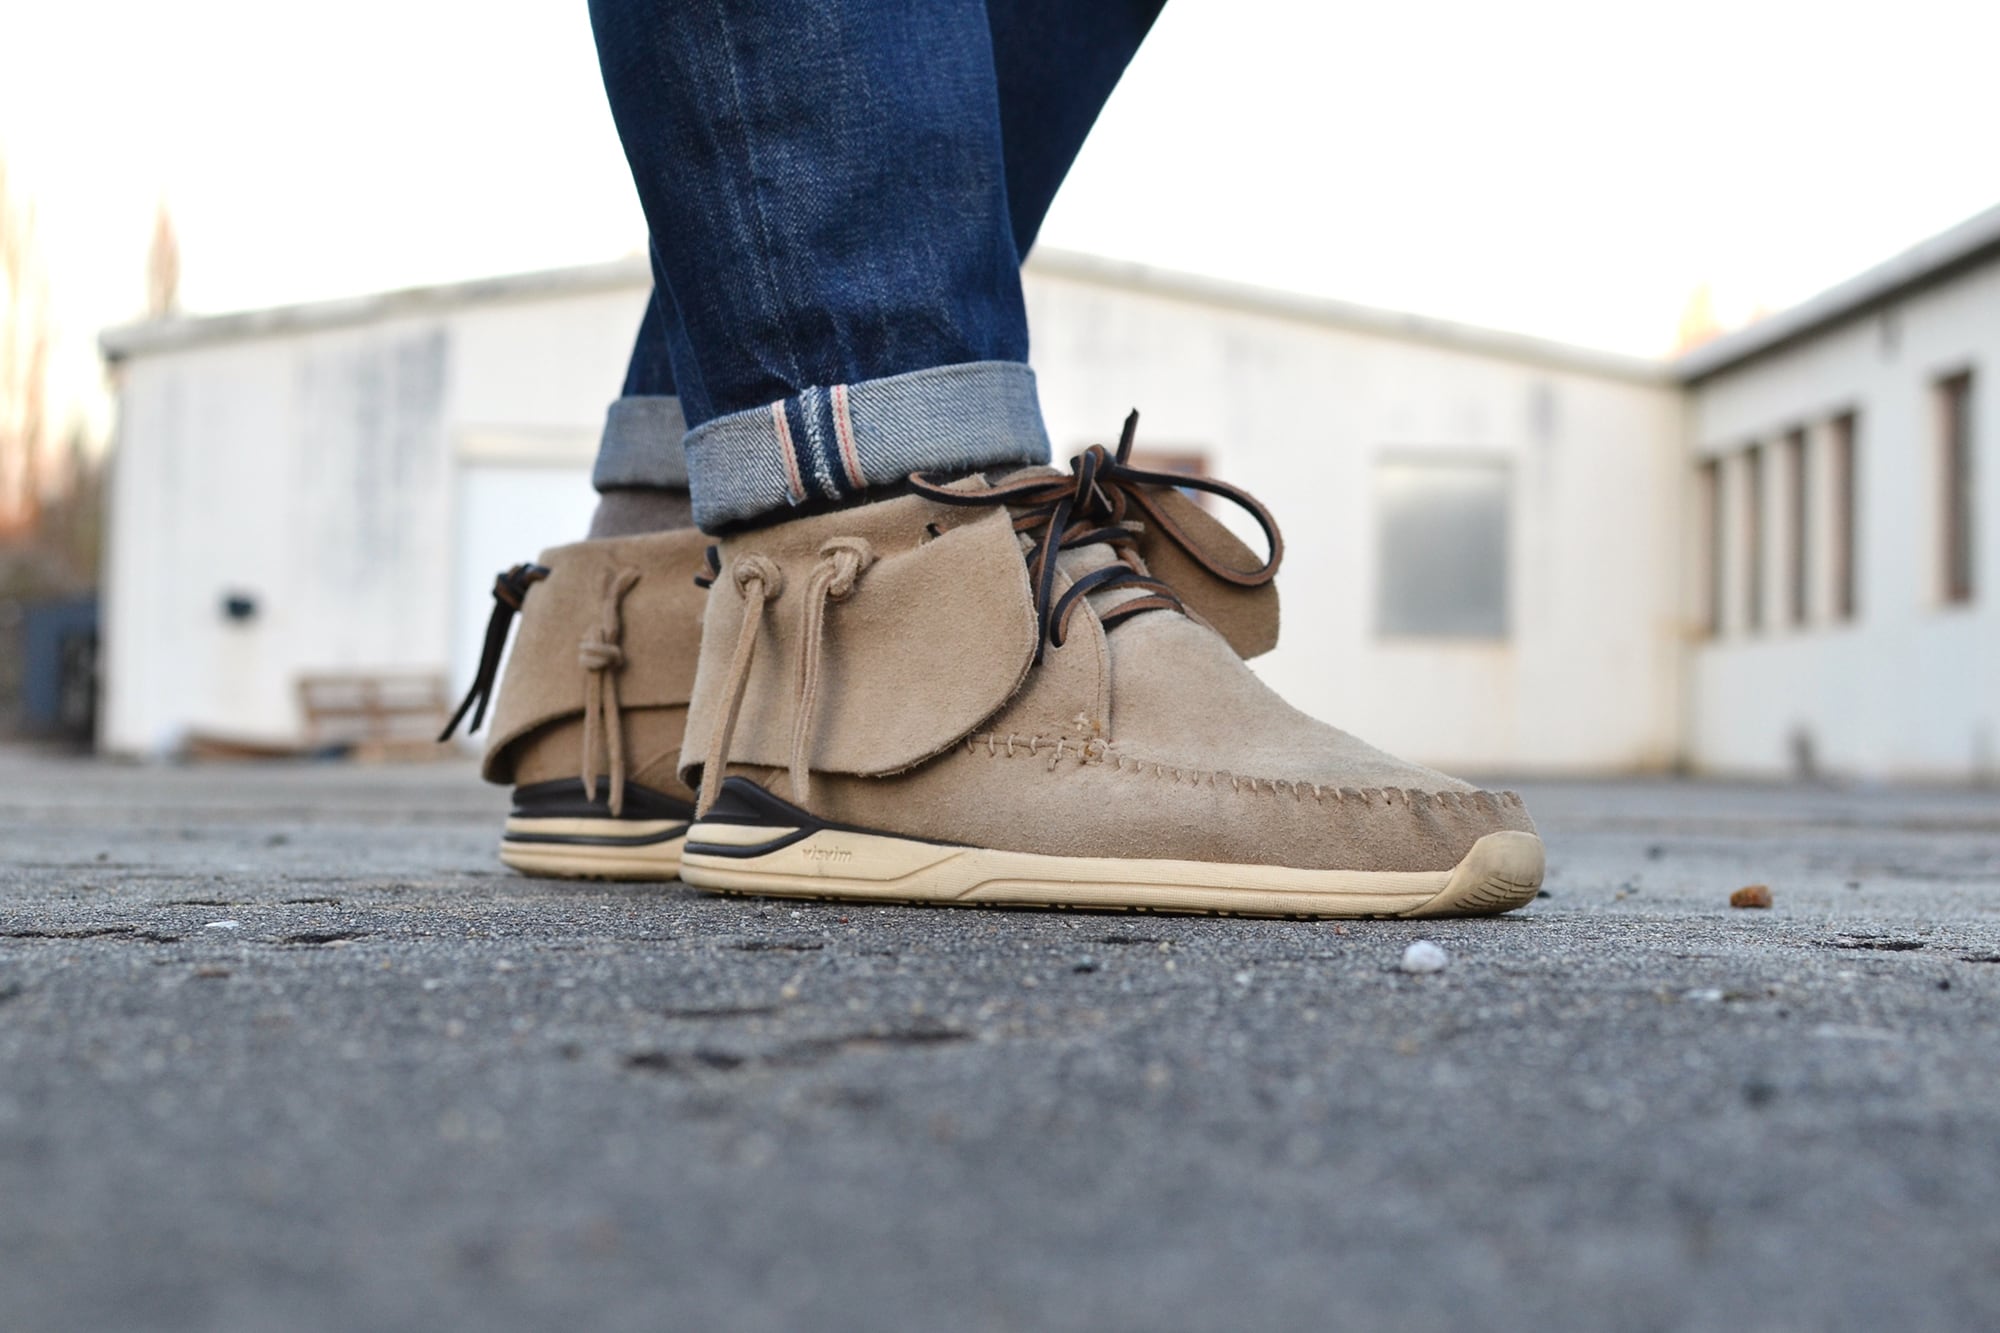 Jeans A.P.C Rescue Custom tapered with sneakers Visvim FBT lhamo color sand